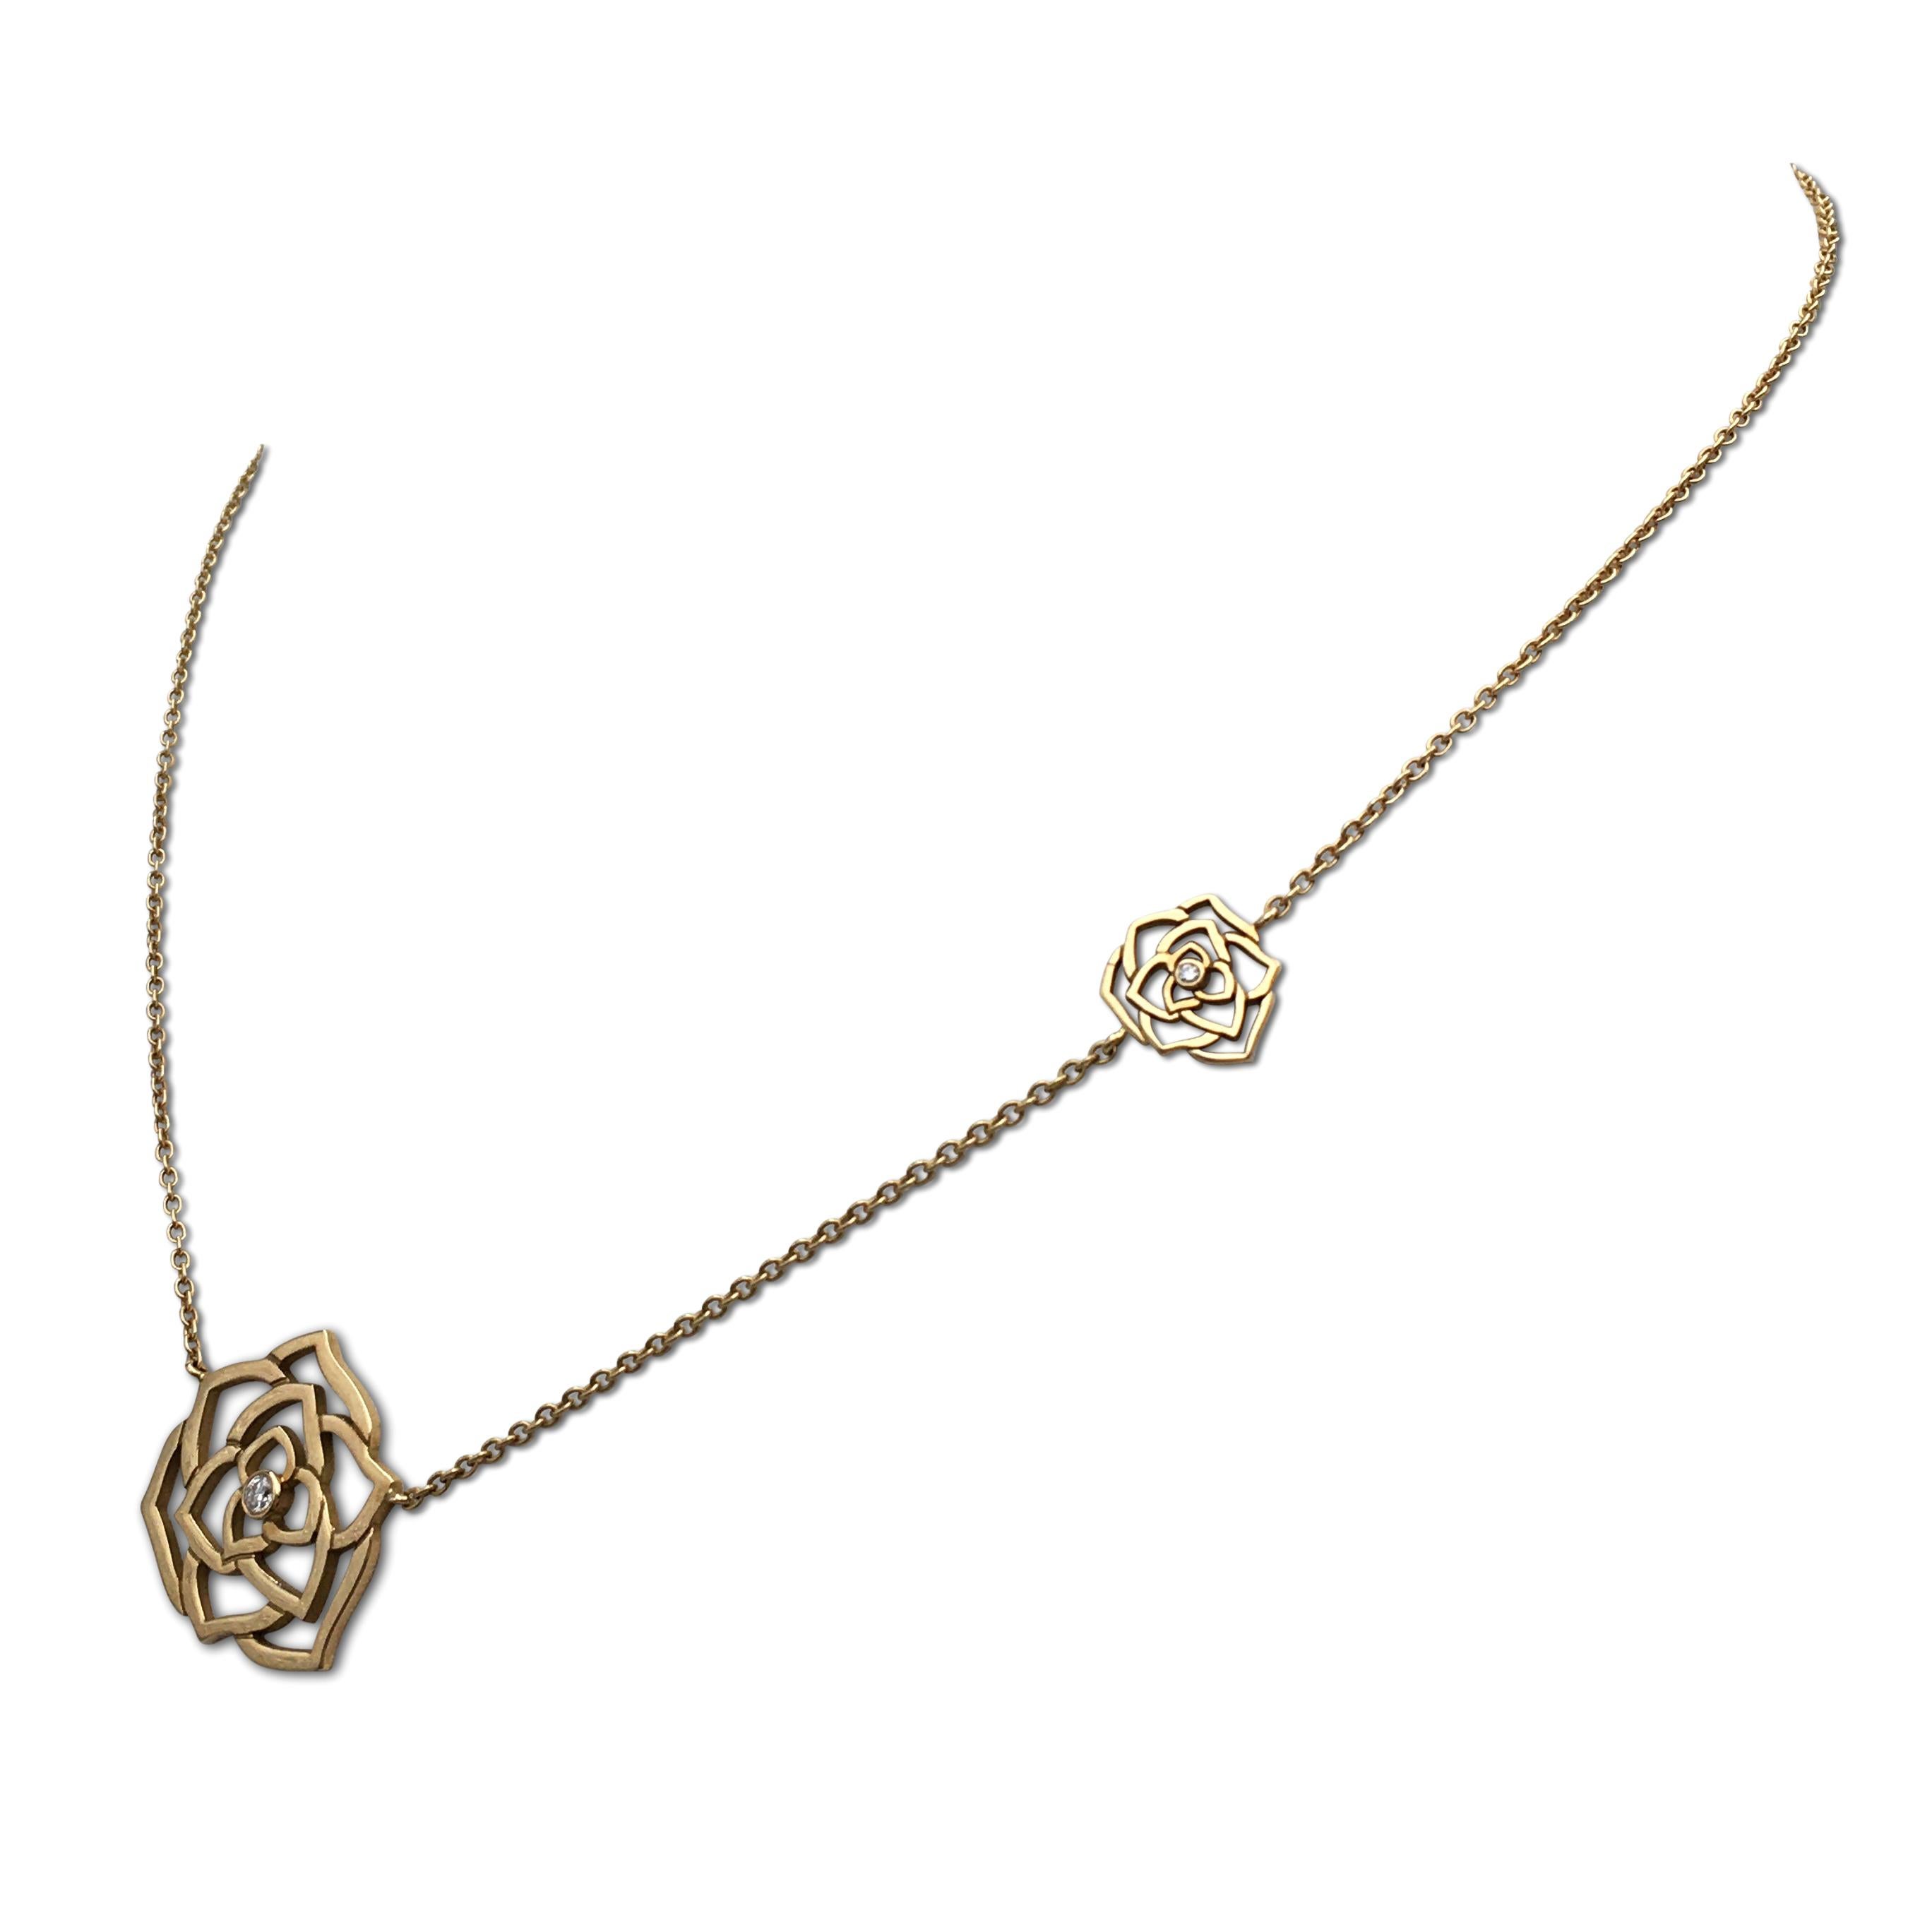 Authentic Piaget necklace from the Rose Collection. Crafted in 18 karat rose gold, the rose pendant features intricate petals and one round brilliant cut diamond weighing an estimated 0.02 carats. The pendant is suspended from a delicate rose gold